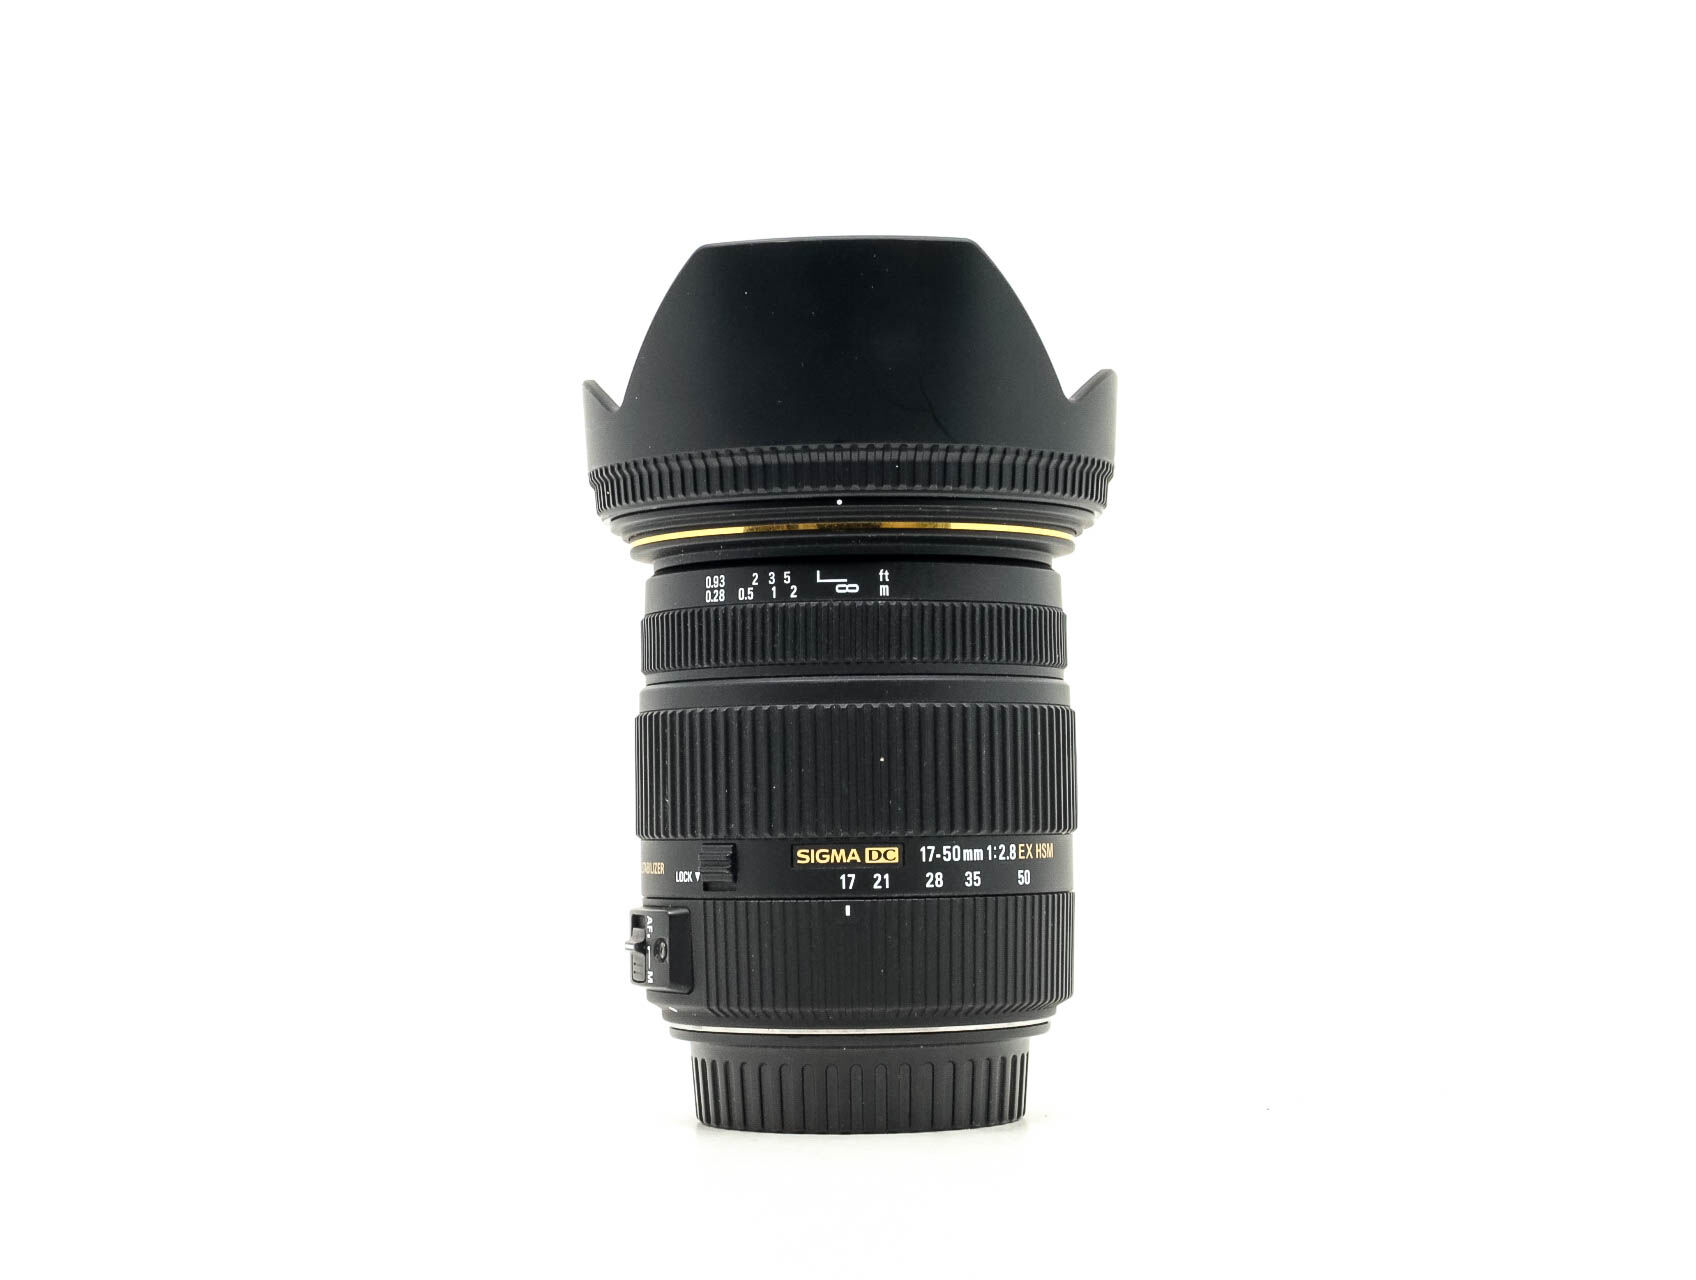 Sigma 17-50mm f/2.8 EX DC OS HSM Canon EF-S Fit (Condition: Good)